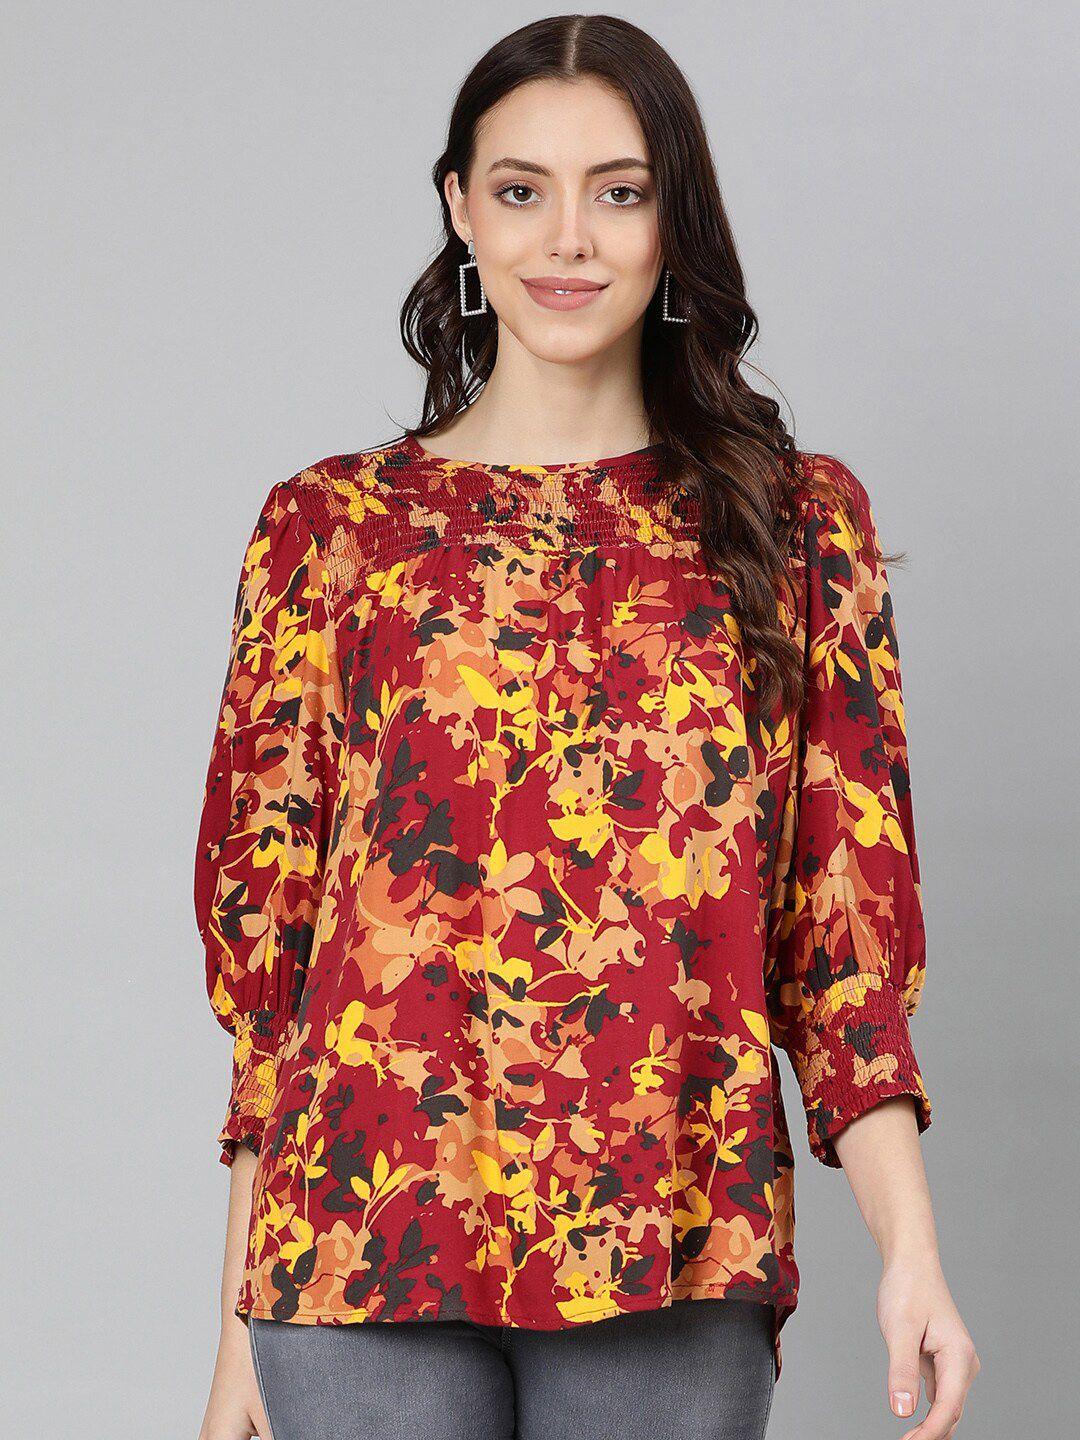 oxolloxo red & yellow floral print crepe blouson smocked top